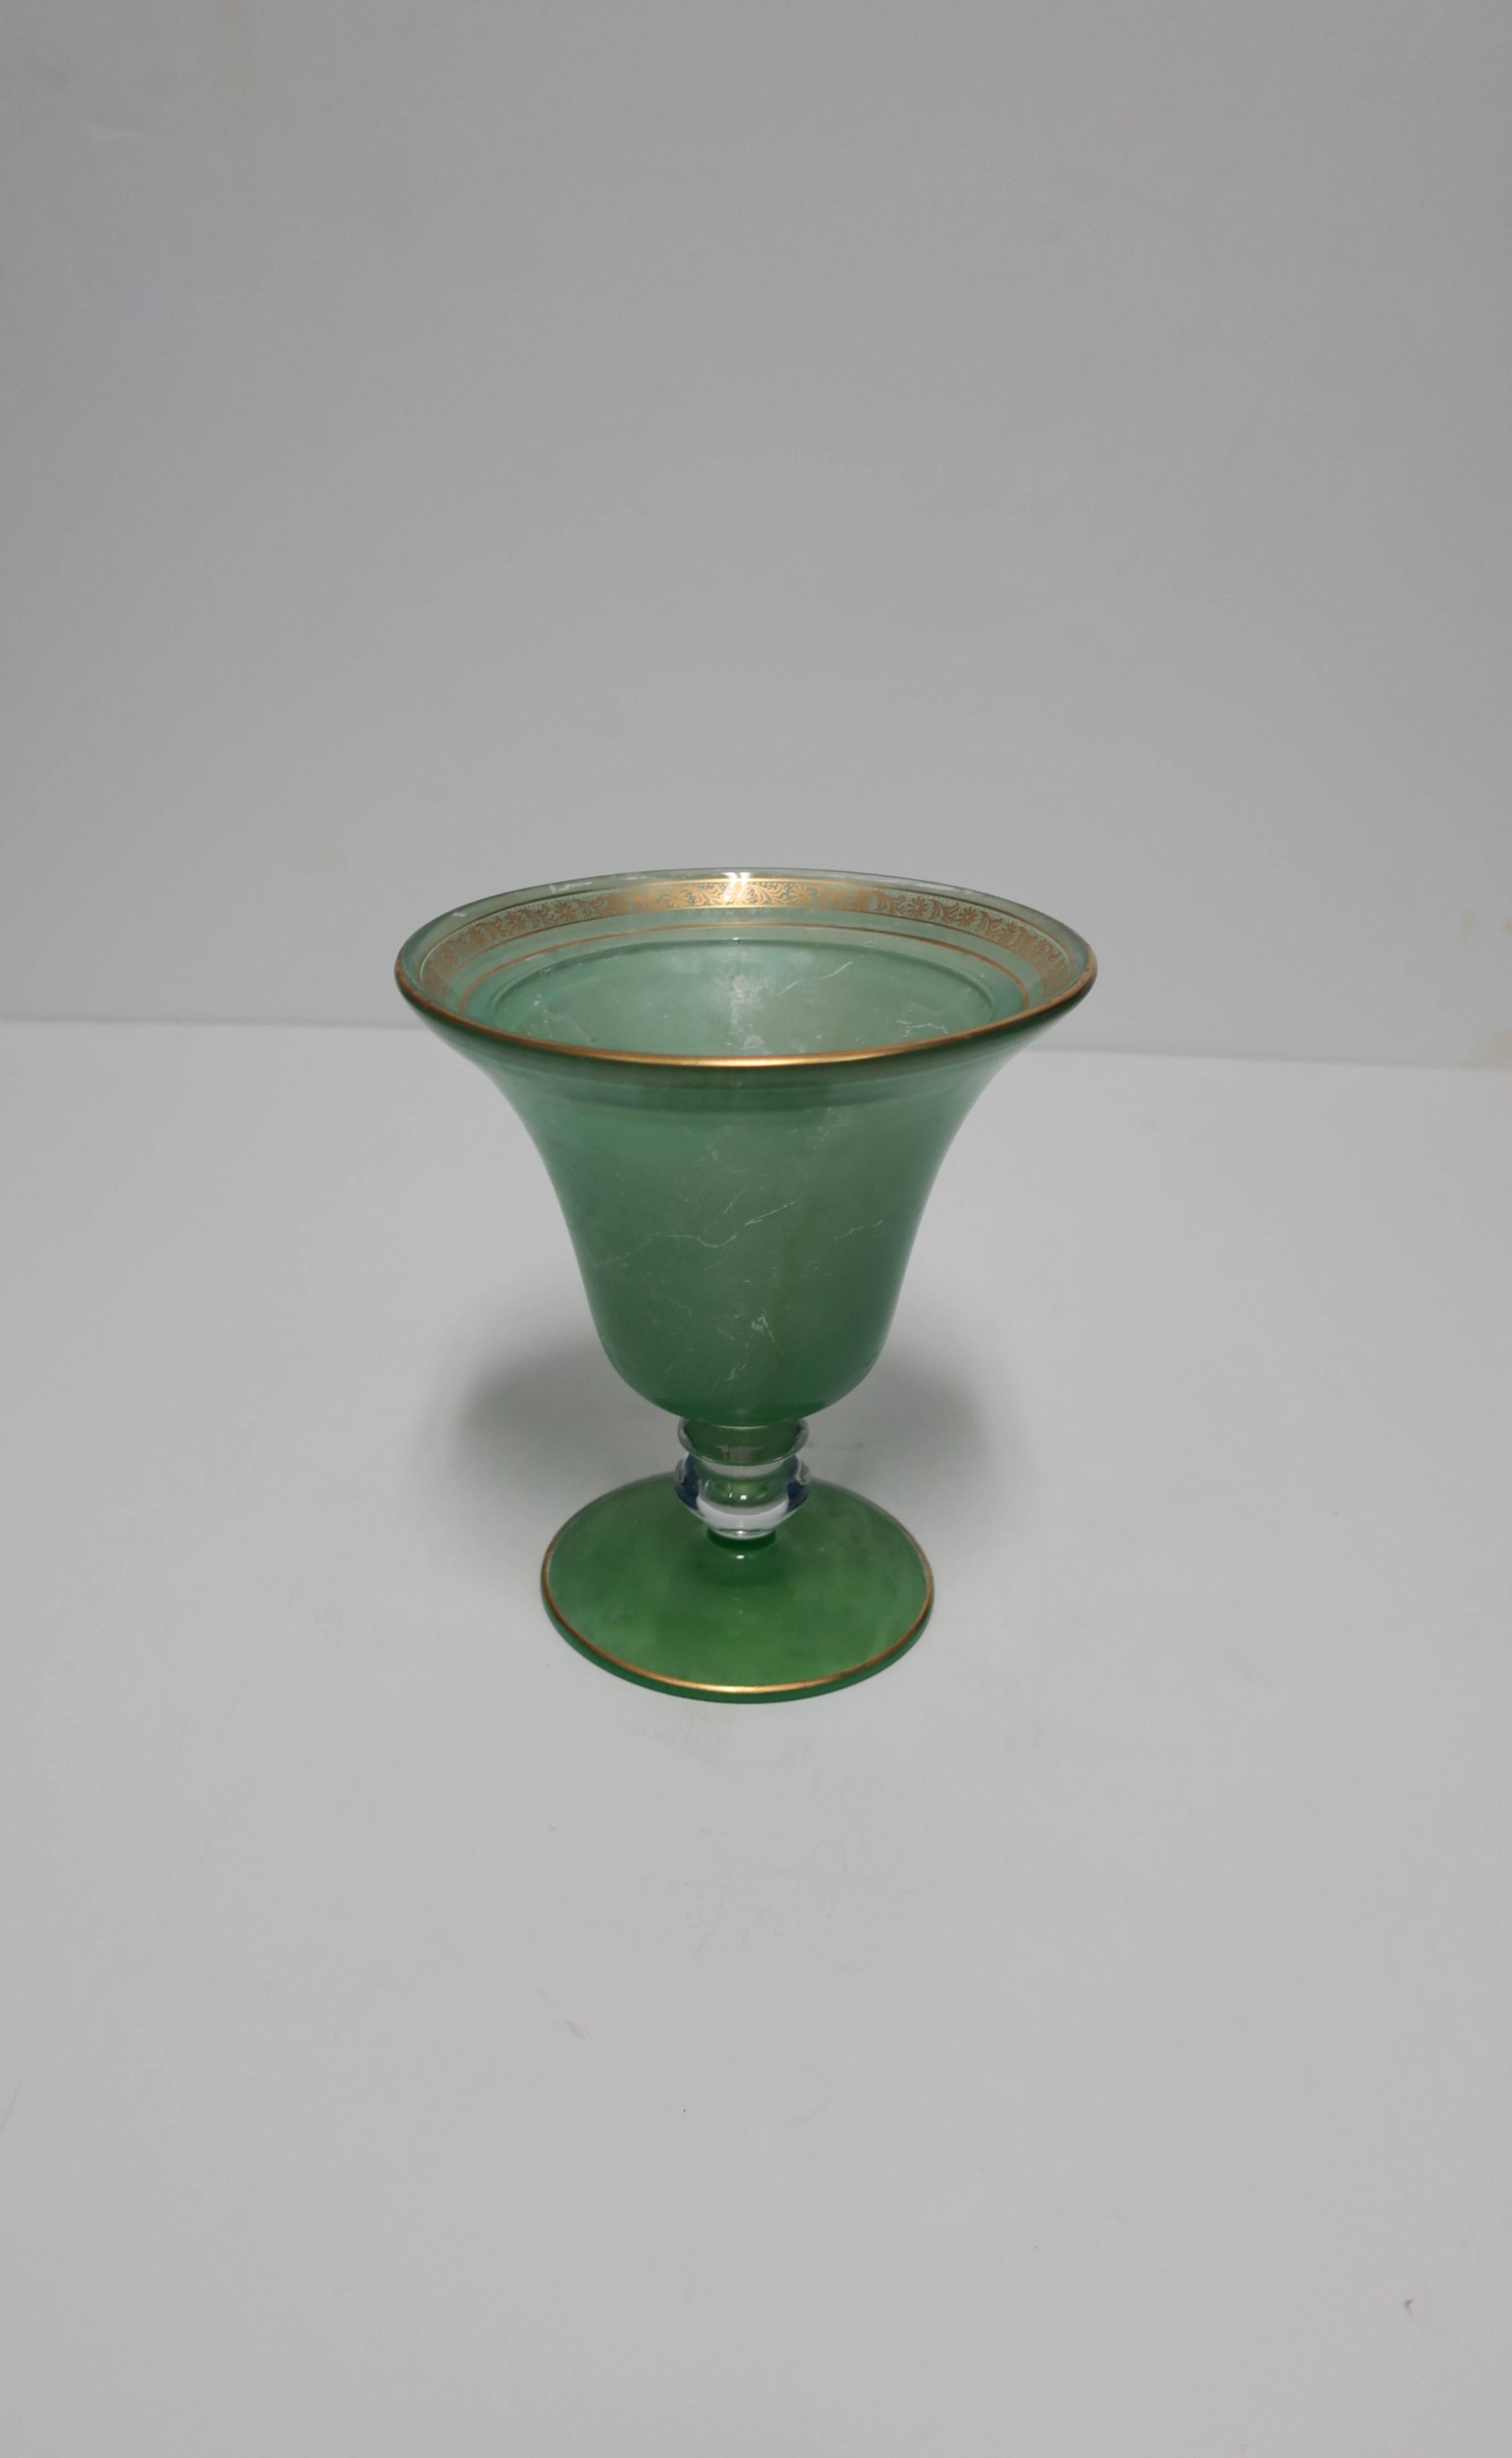 A beautiful early to mid-20th century light green and gold glass urn vase or vessel; piece is finished in a thin green finish, and gold details on the top rim and bottom base. Beautiful standalone piece or with flowers. Measures 6.5